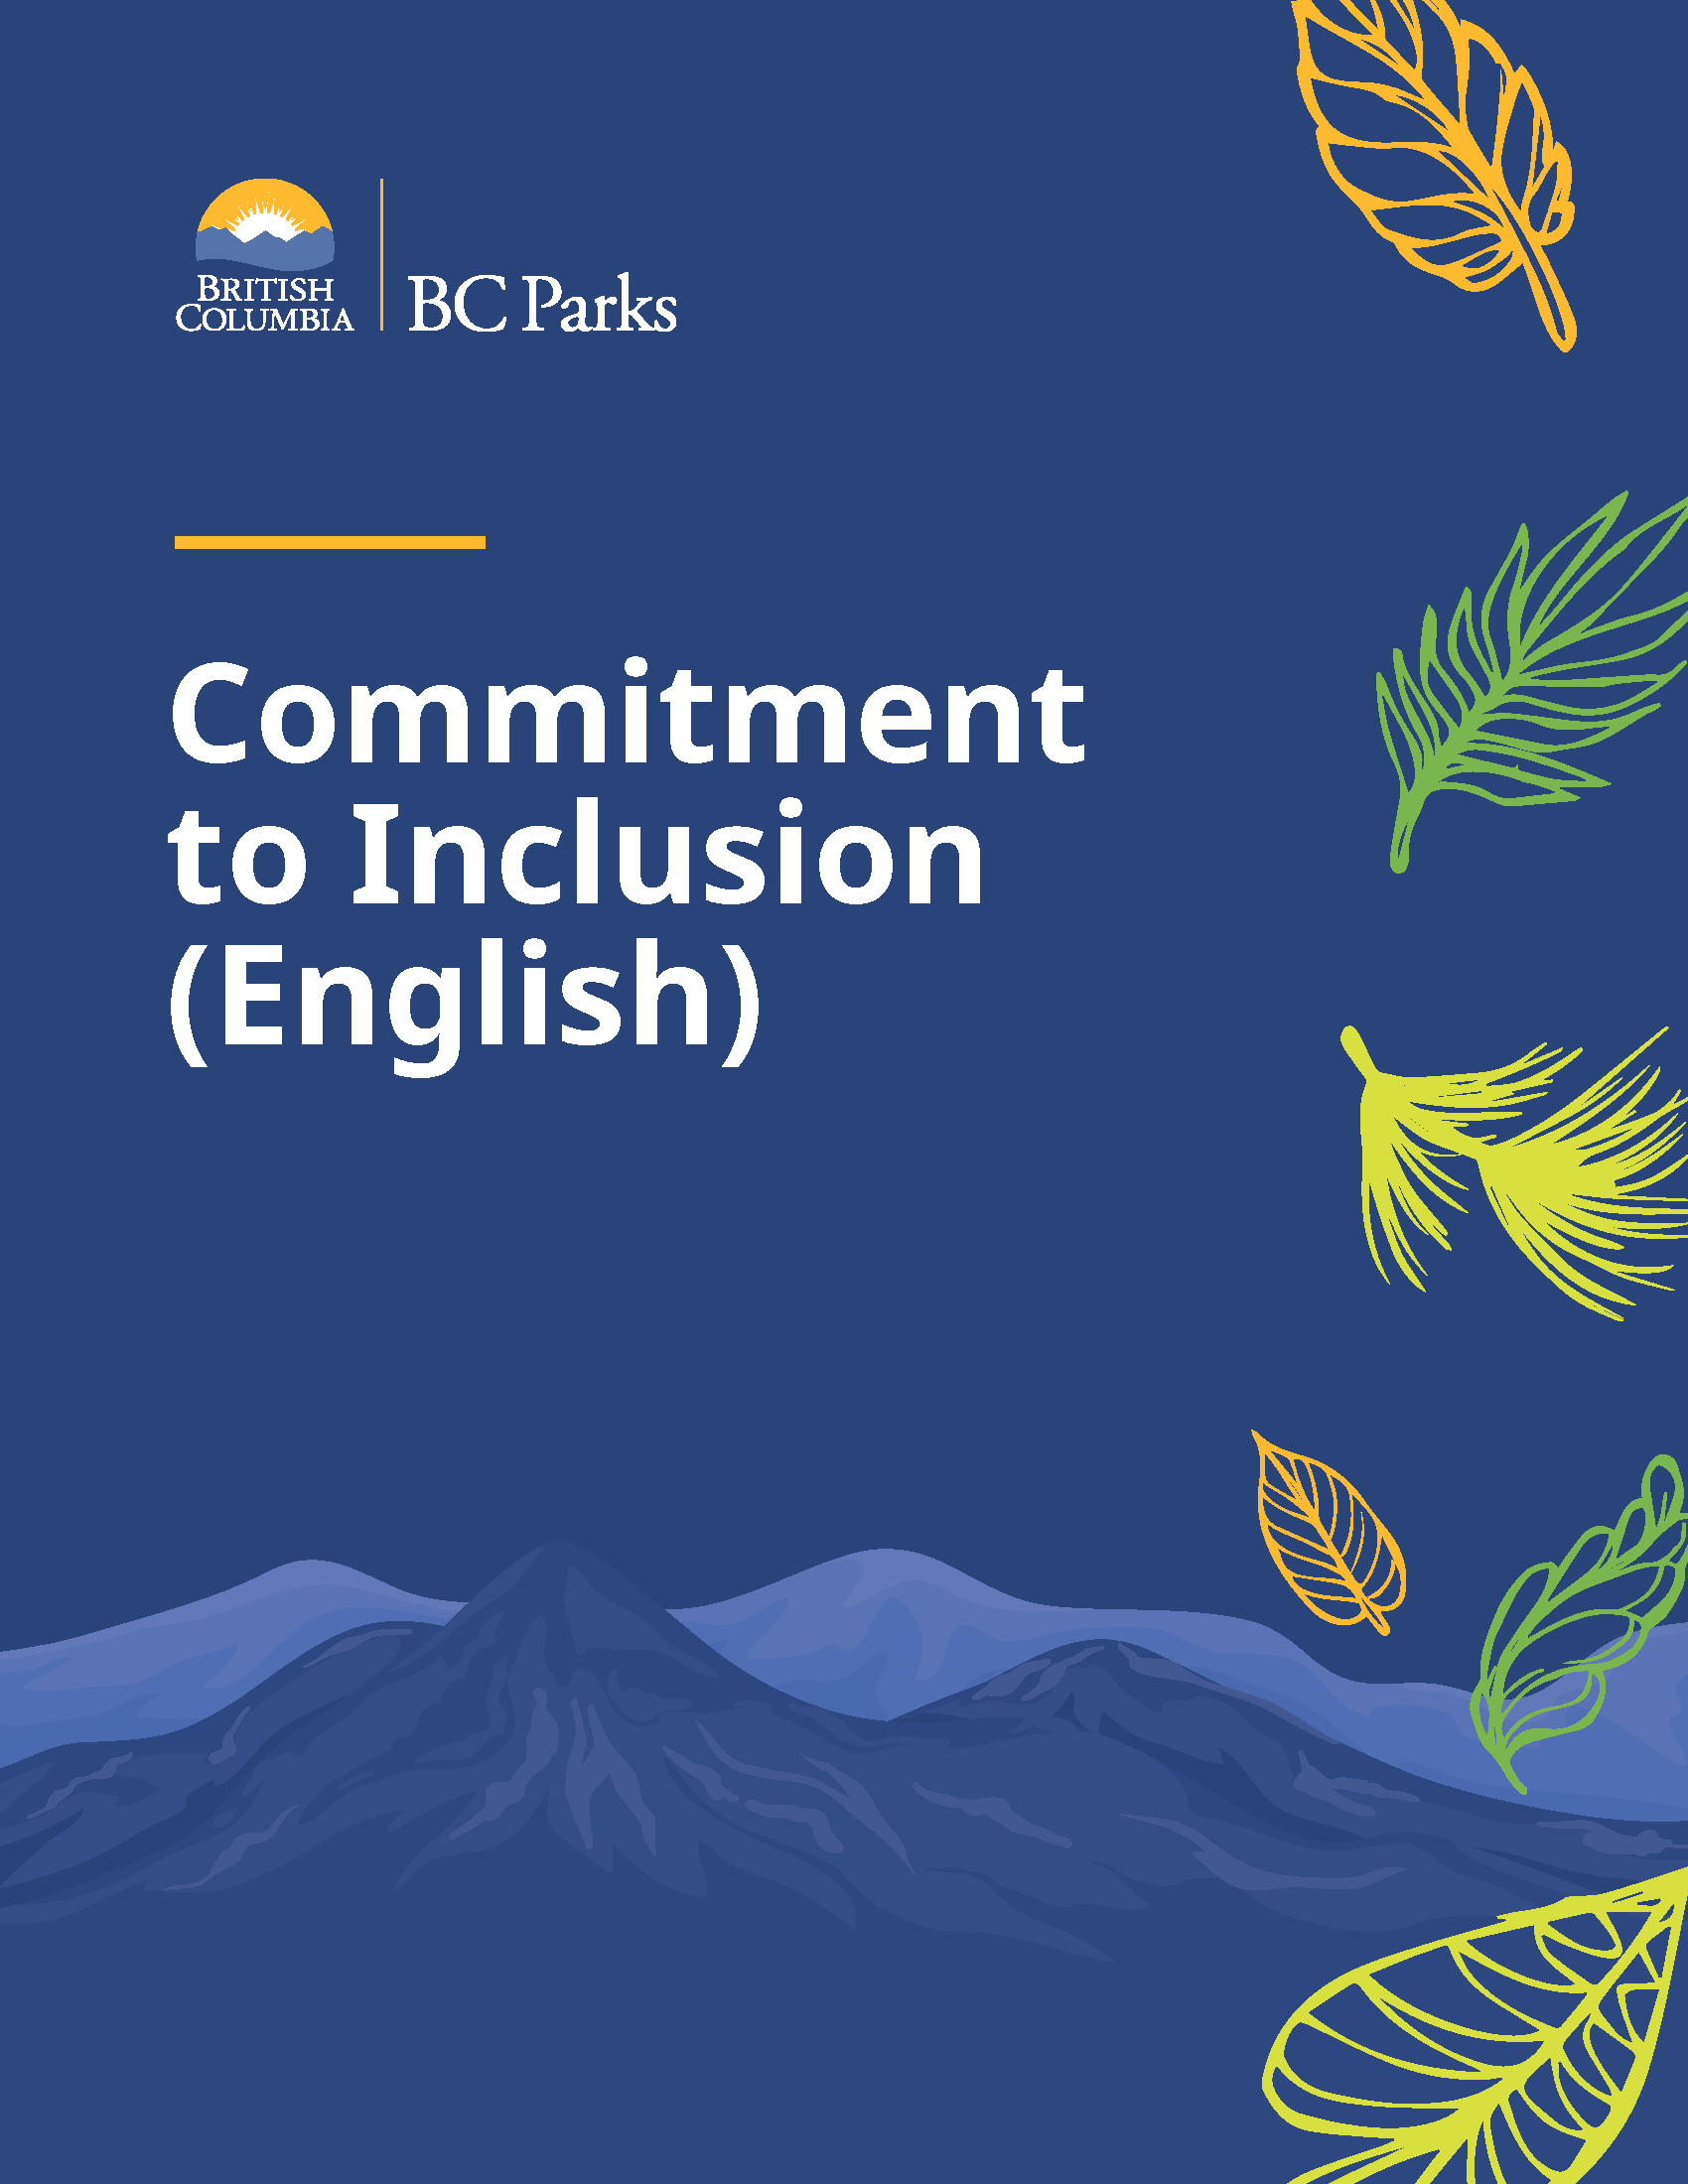 BC Parks Commitment to Inclusion PDF in English